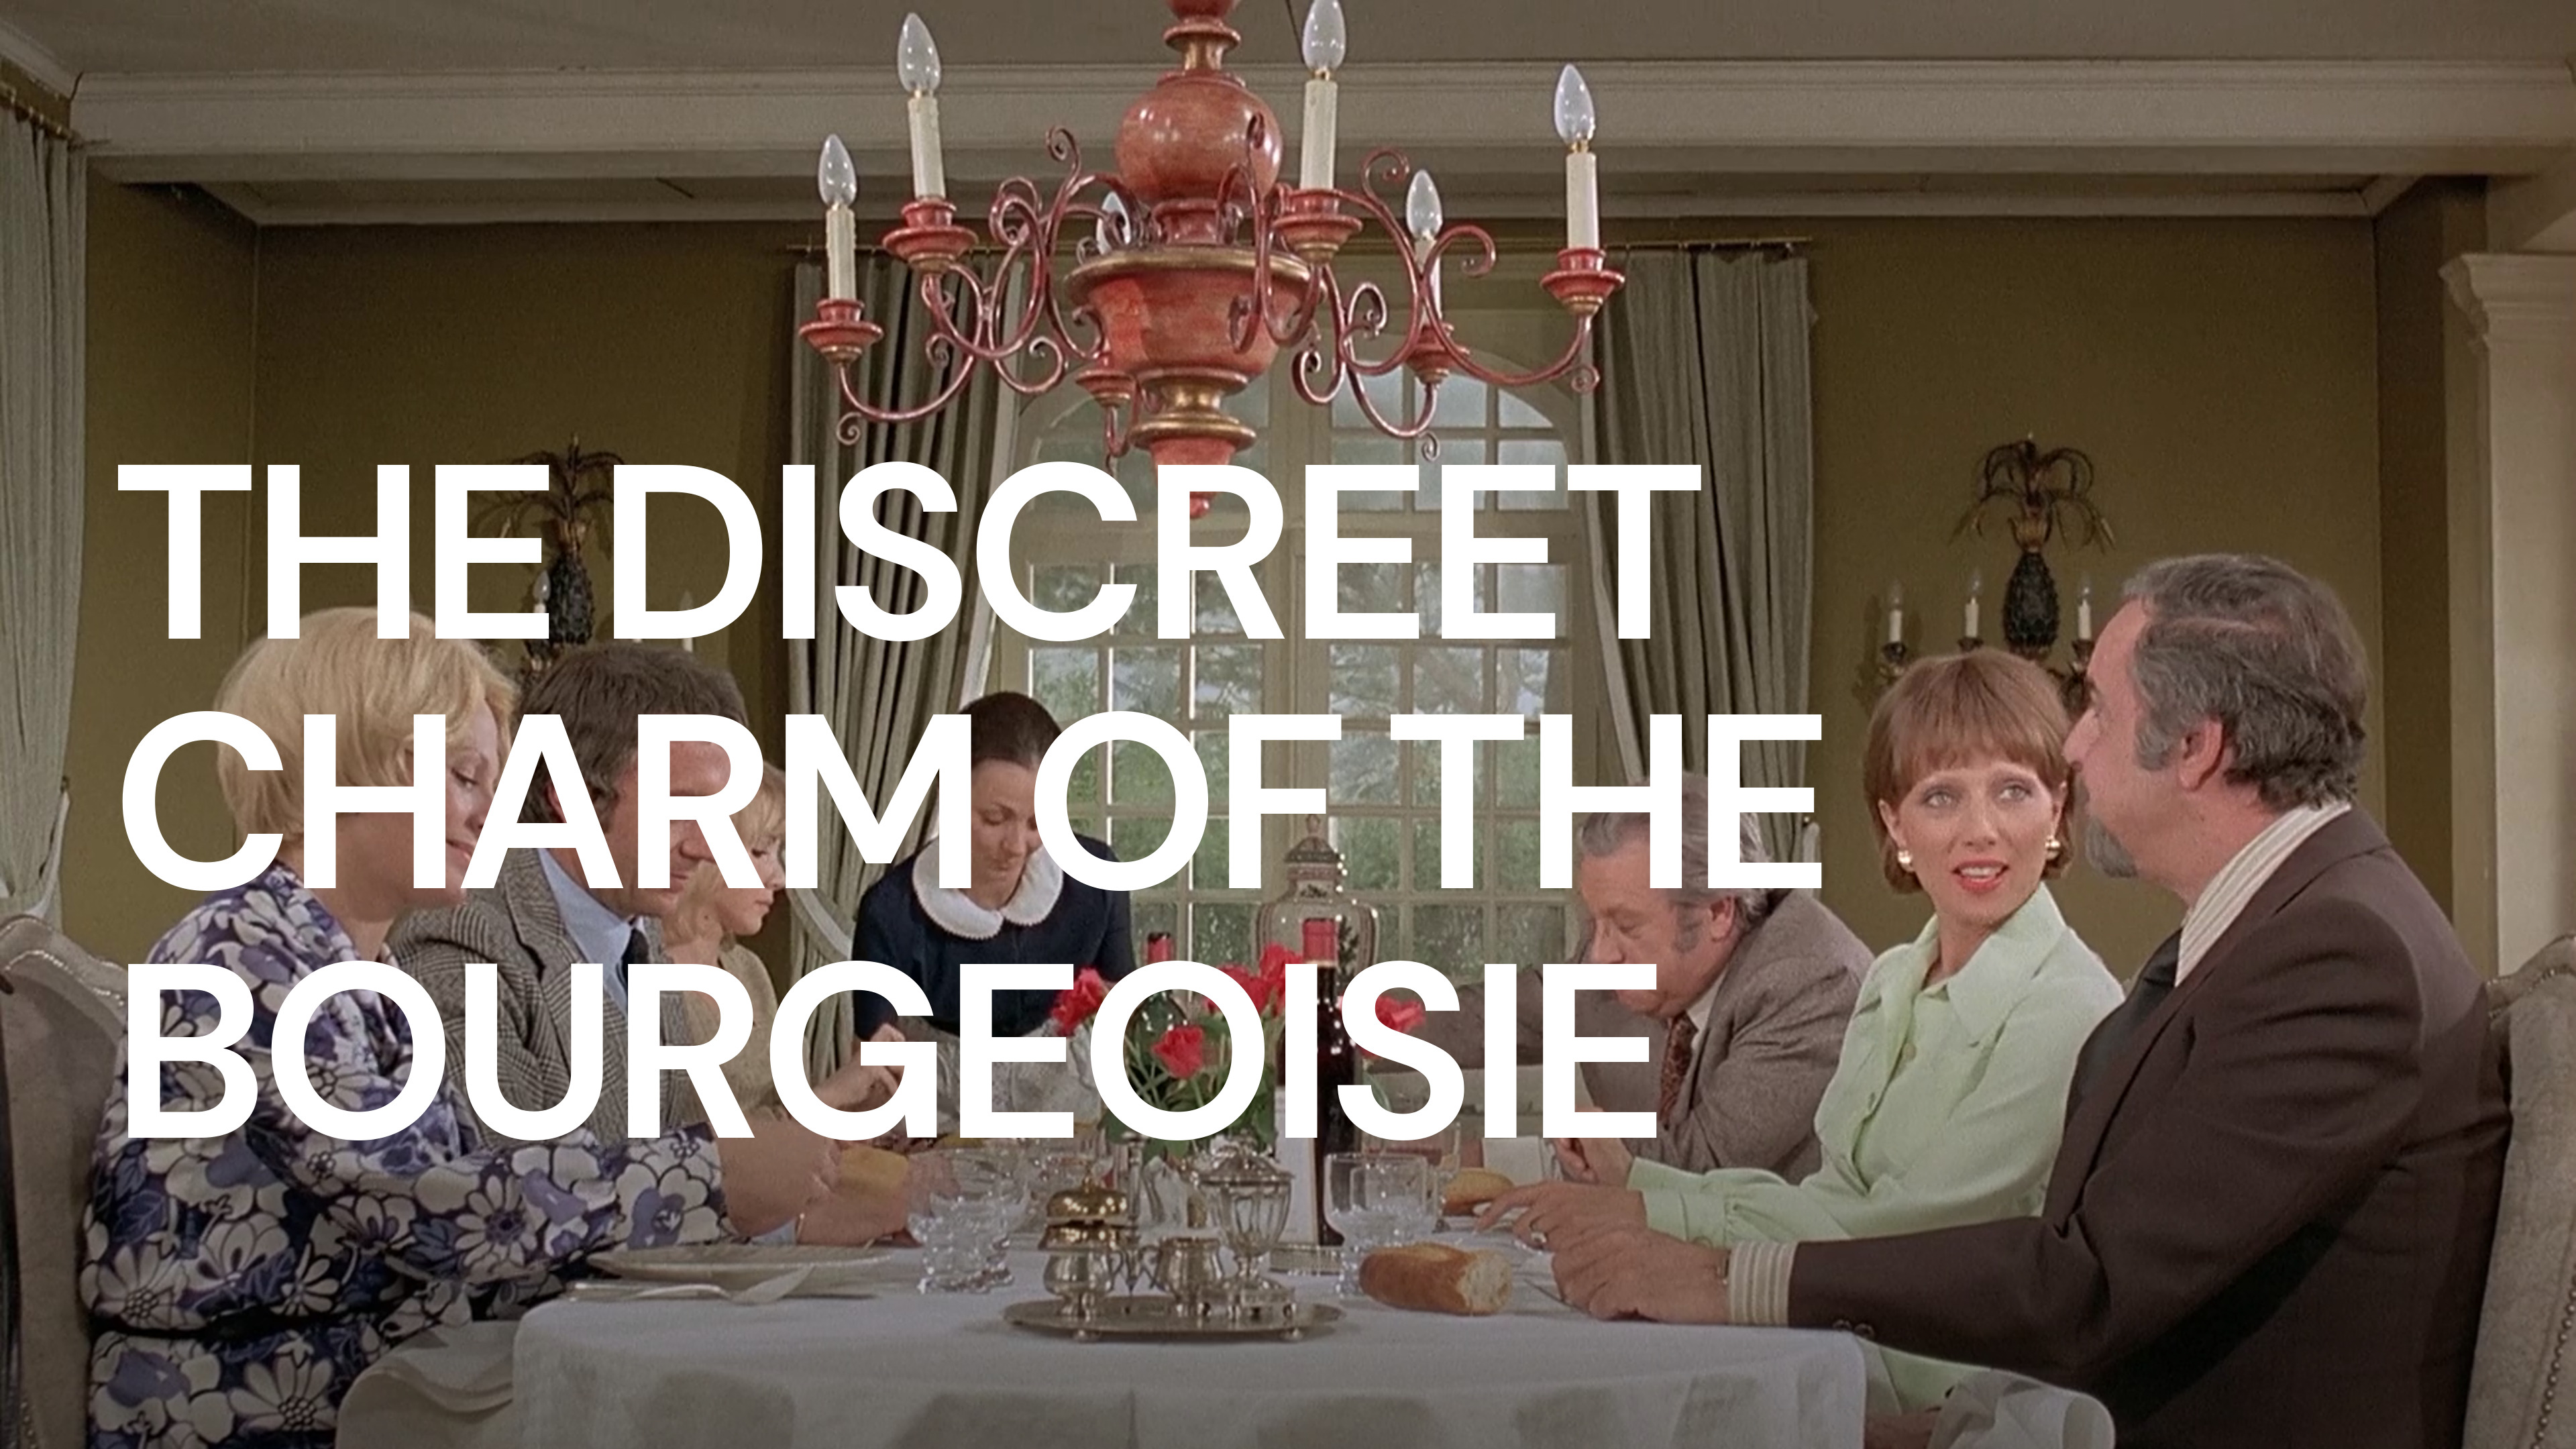 45-facts-about-the-movie-the-discreet-charm-of-the-bourgeoisie